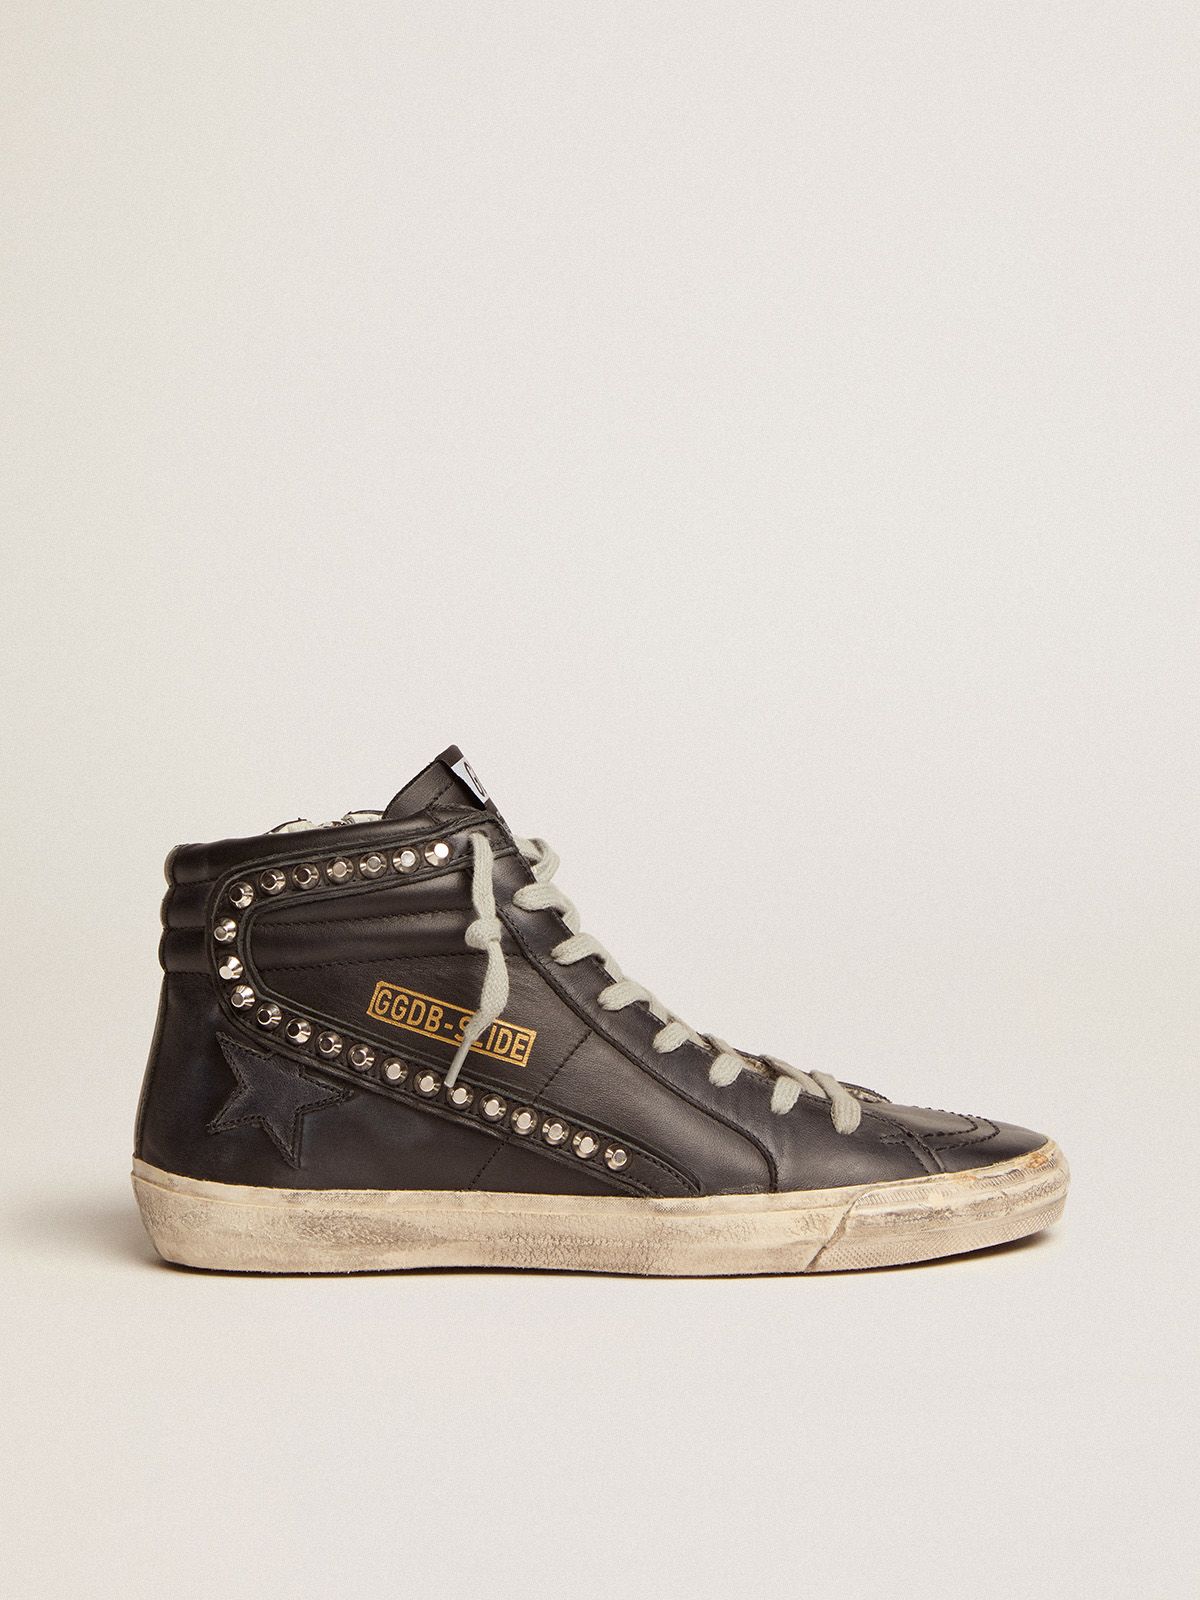 golden goose metal Slide sneakers studded leather in